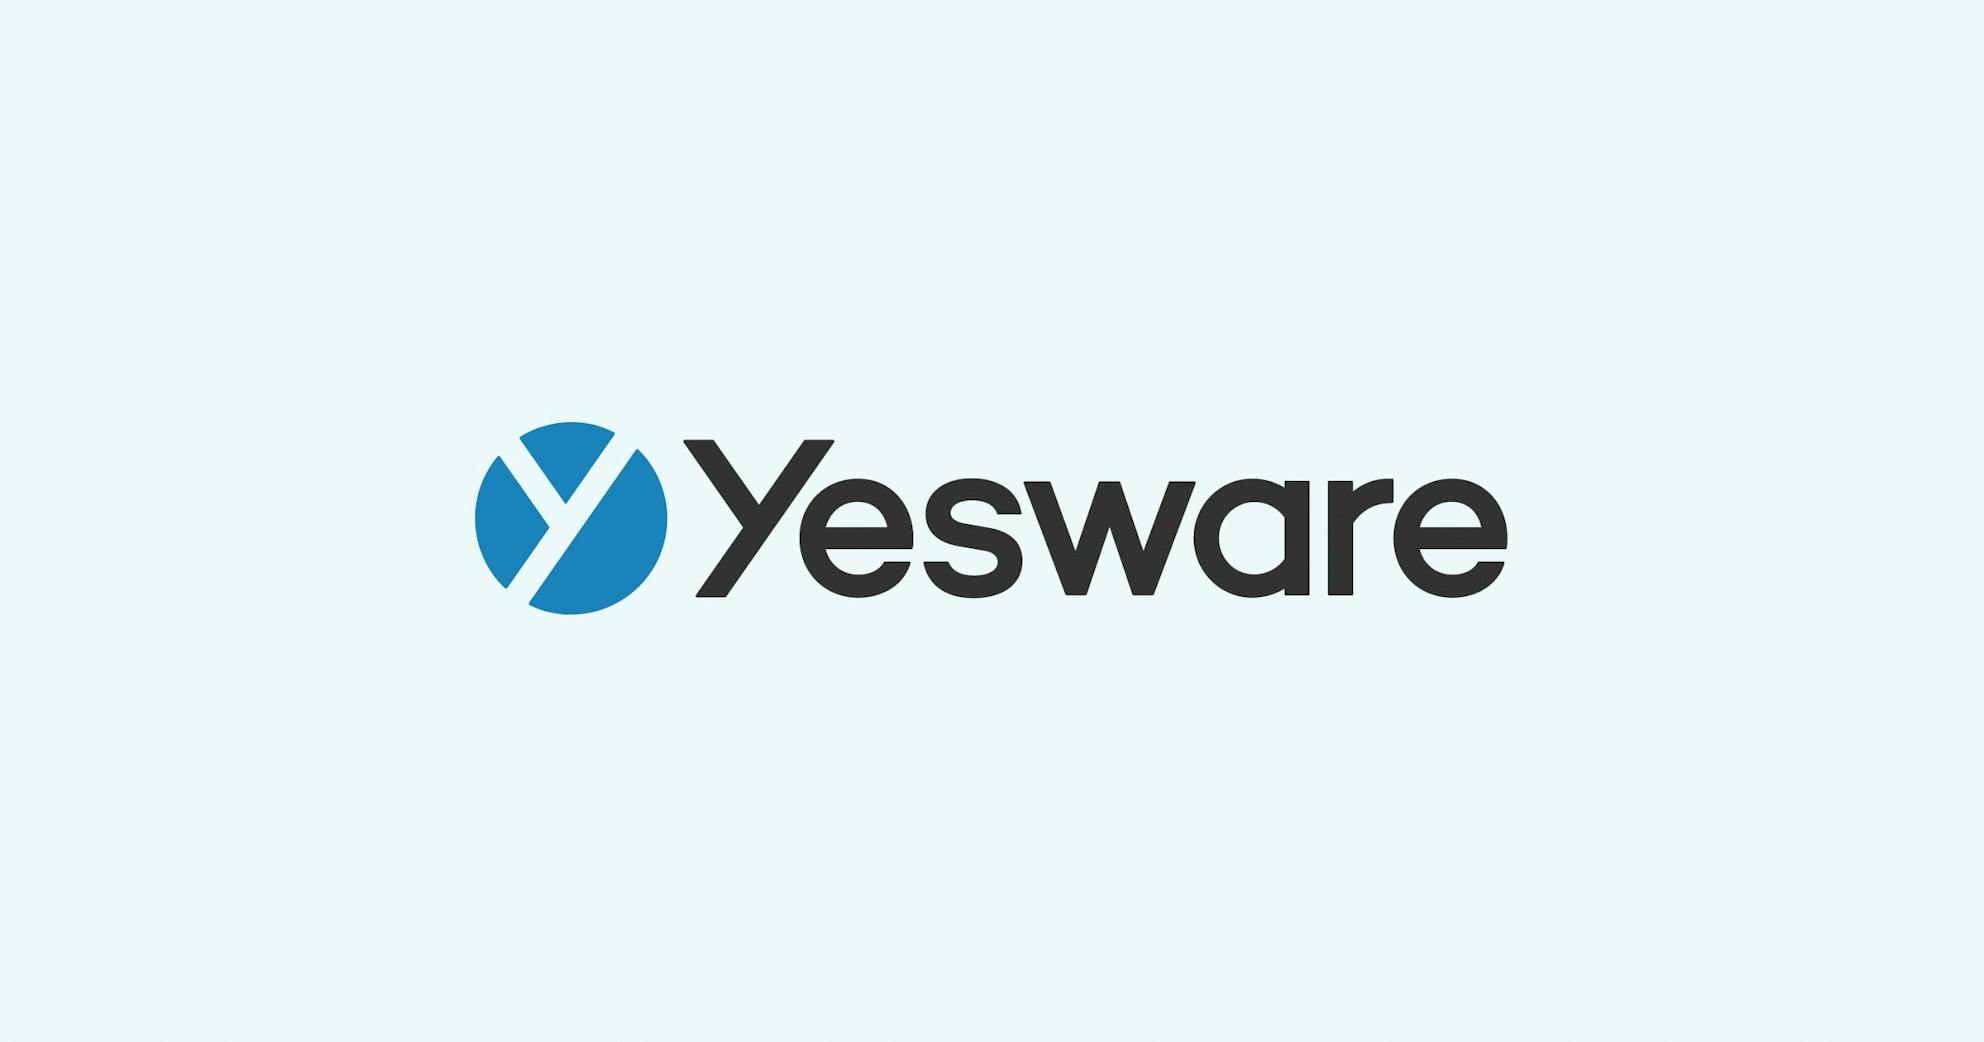 Using Yesware to Log Salesforce Activity More Consistently